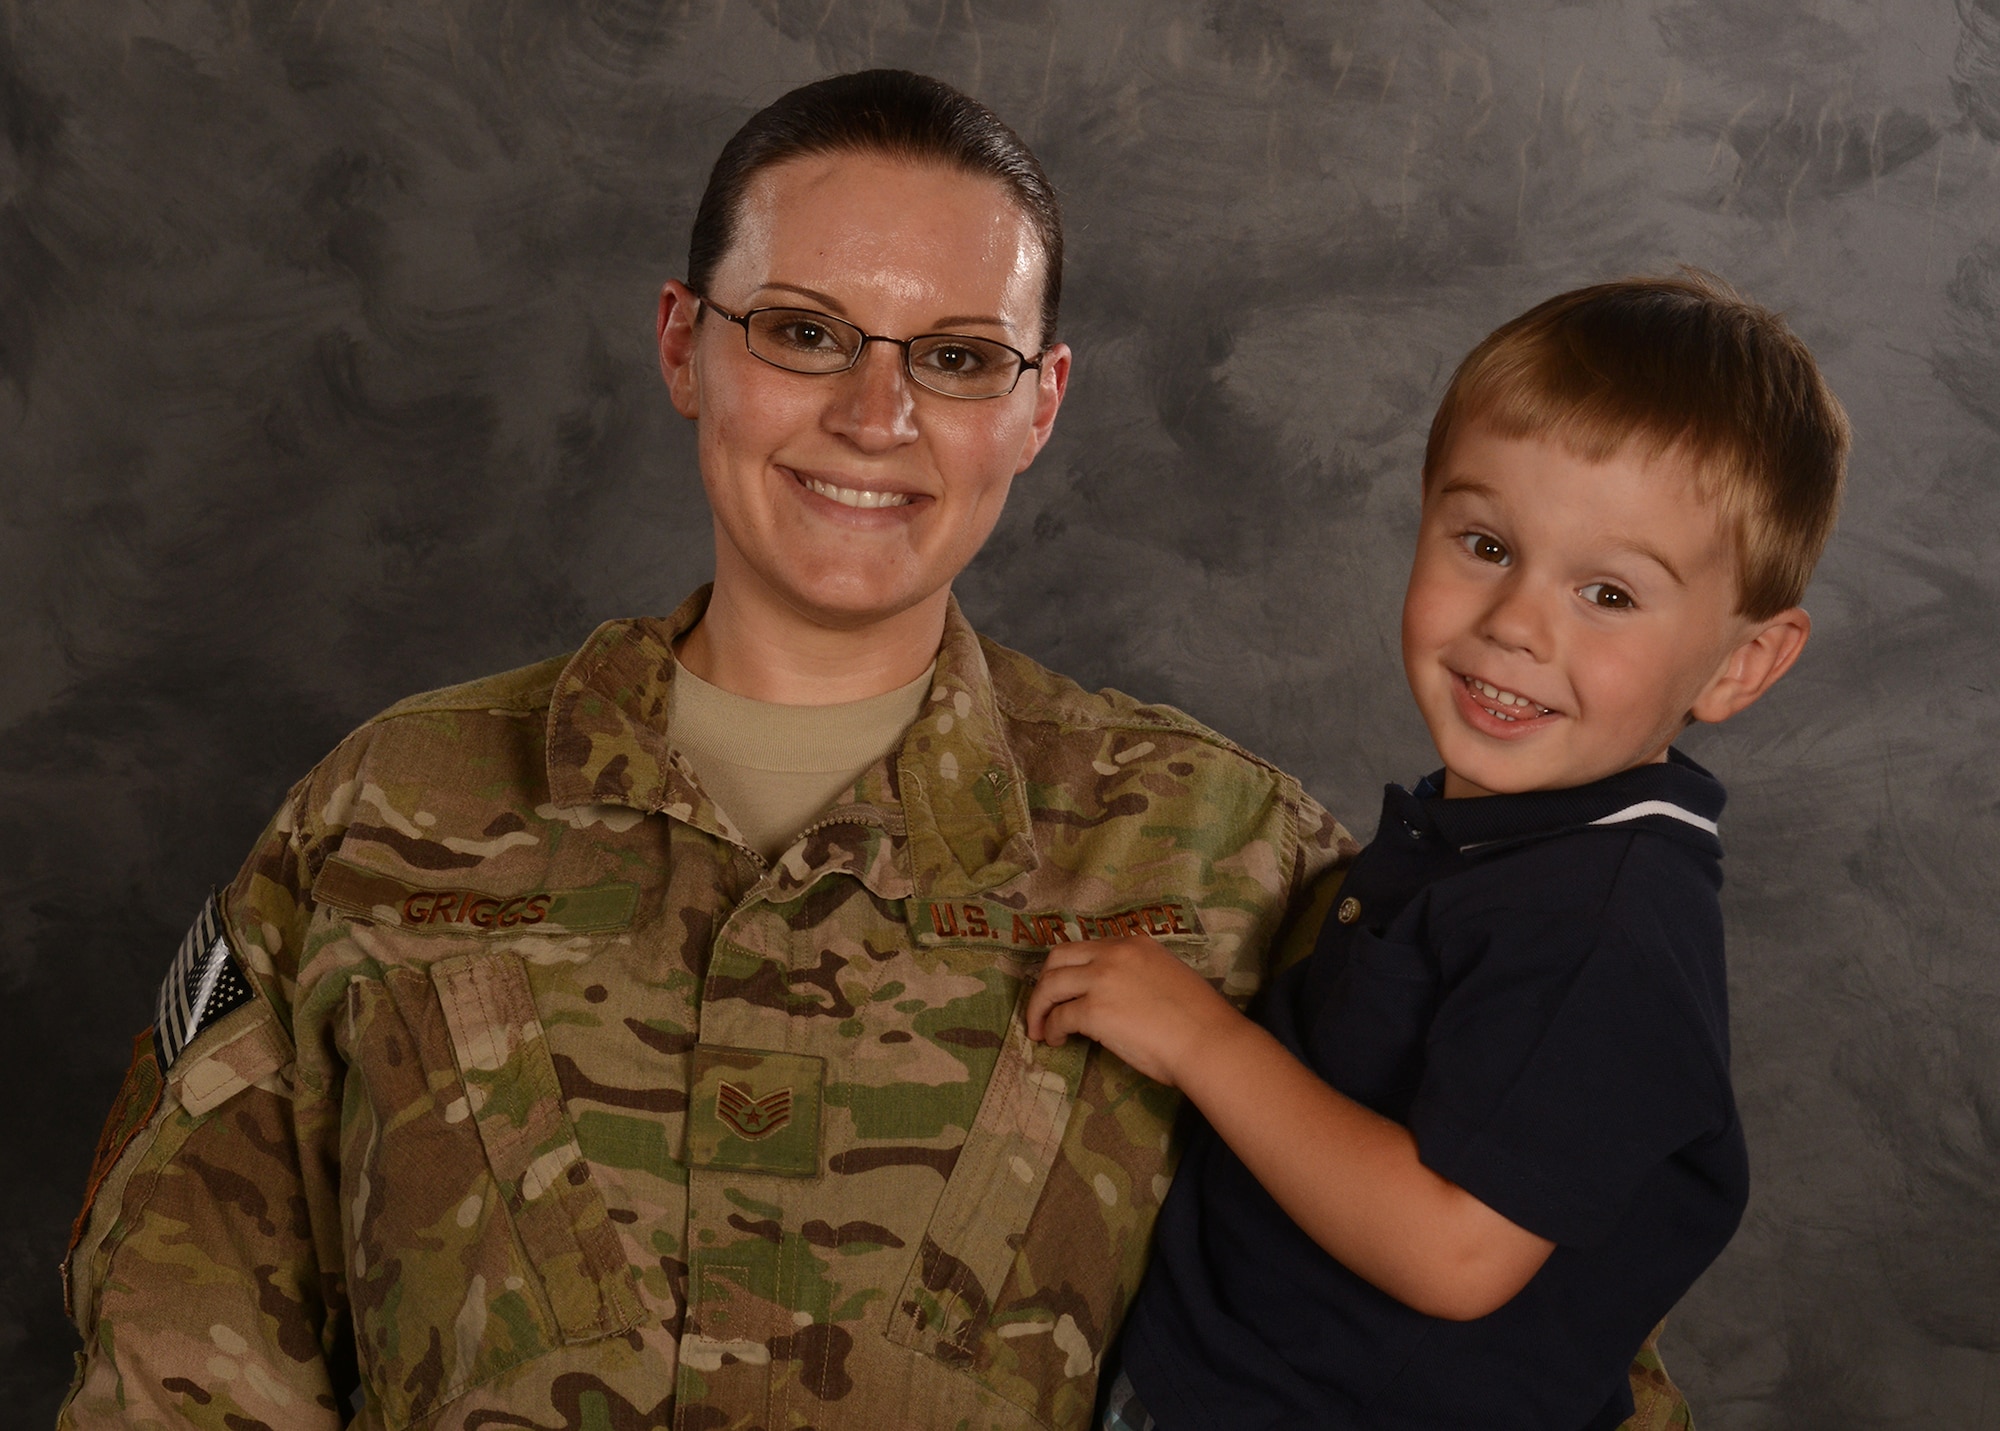 U.S. Air Force Staff Sgt. Amanda Griggs, 23d Component Maintenance Squadron aerospace propulsion craftsman, holds her son, Korbin, for a photo at Moody Air Force Base, Ga., May 8, 2014. Griggs was deployed to Bagram Air Field, Afghanistan for six months of Korbin’s life and was selected to share her story in honor of Mother’s Day 2014. (U.S. Air Force photo illustration by Senior Airman Tiffany M. Grigg/Released)